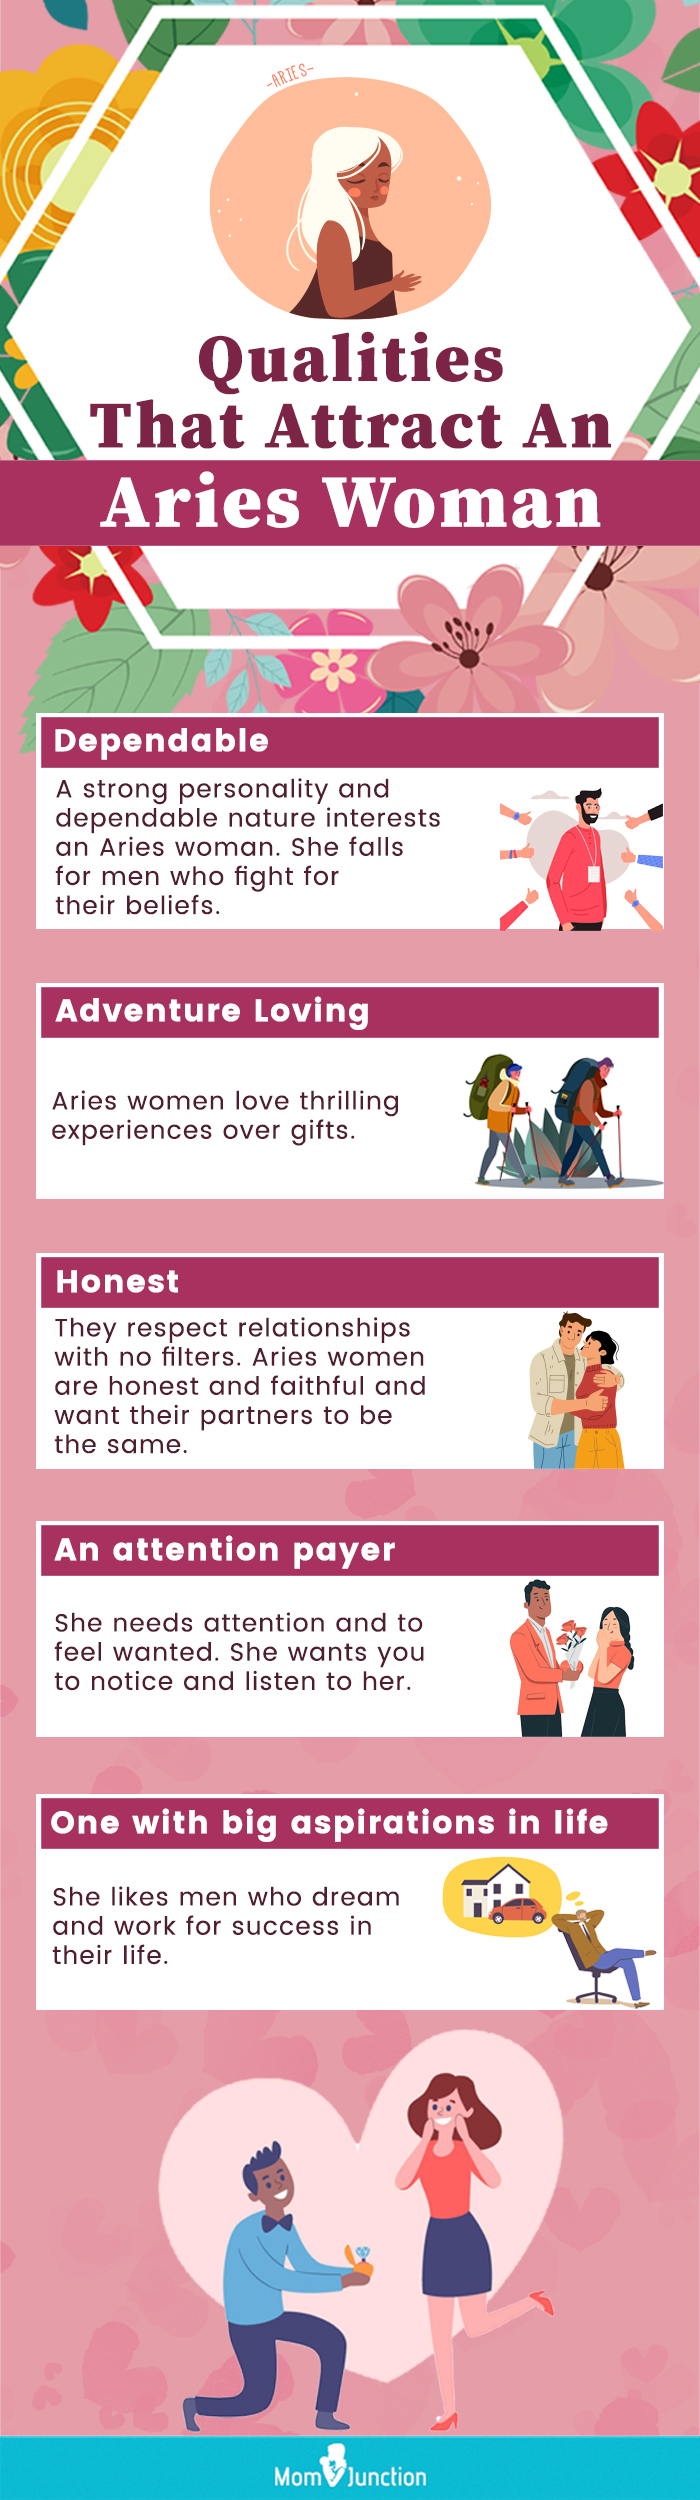 qualities that attract an aries woman (infographic)